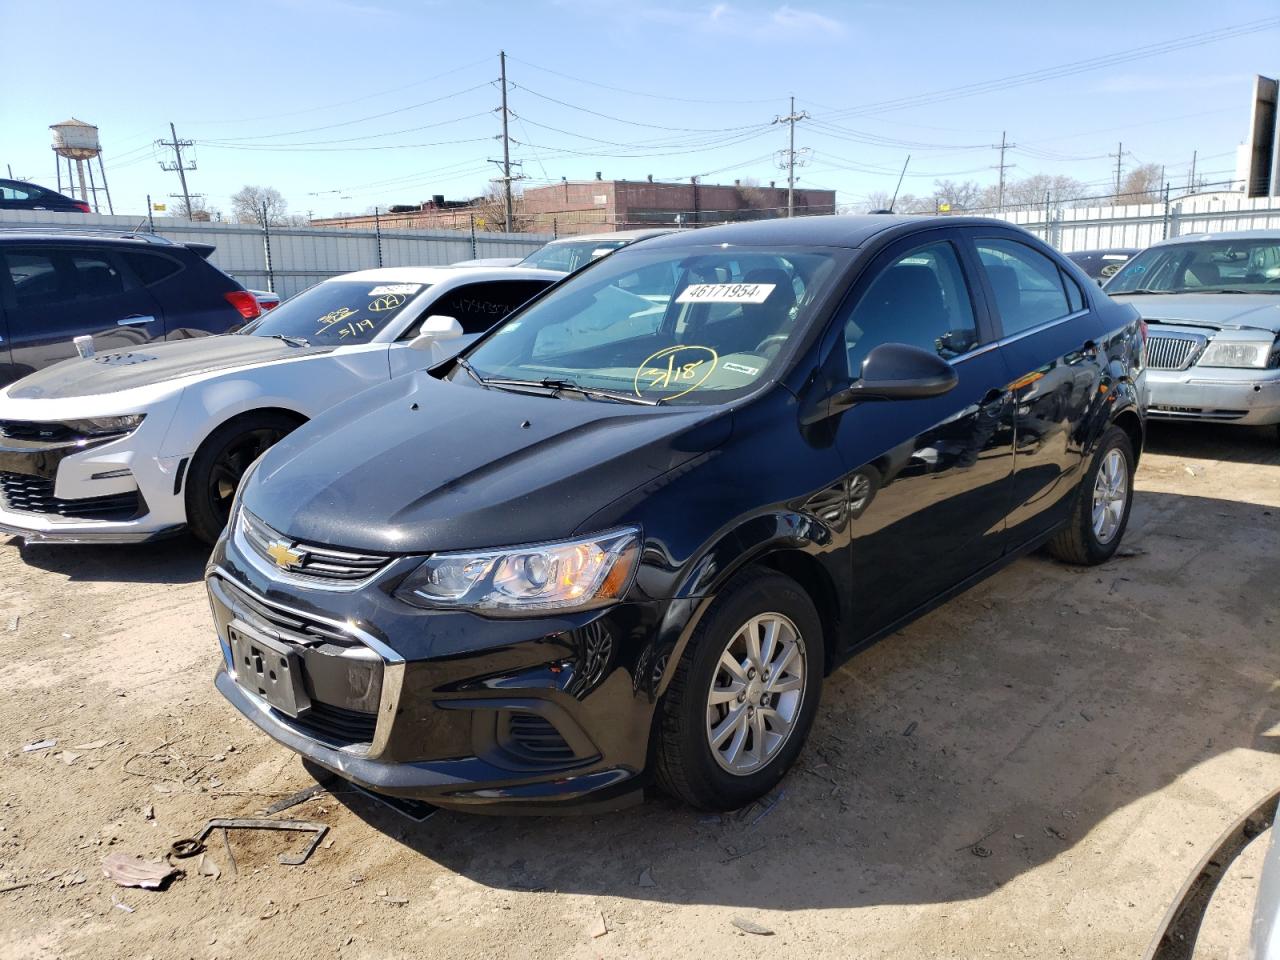 vin: 1G1JD5SB5L4125795 1G1JD5SB5L4125795 2020 chevrolet sonic 1400 for Sale in 60411 5546, Il - Chicago South, Chicago Heights, USA